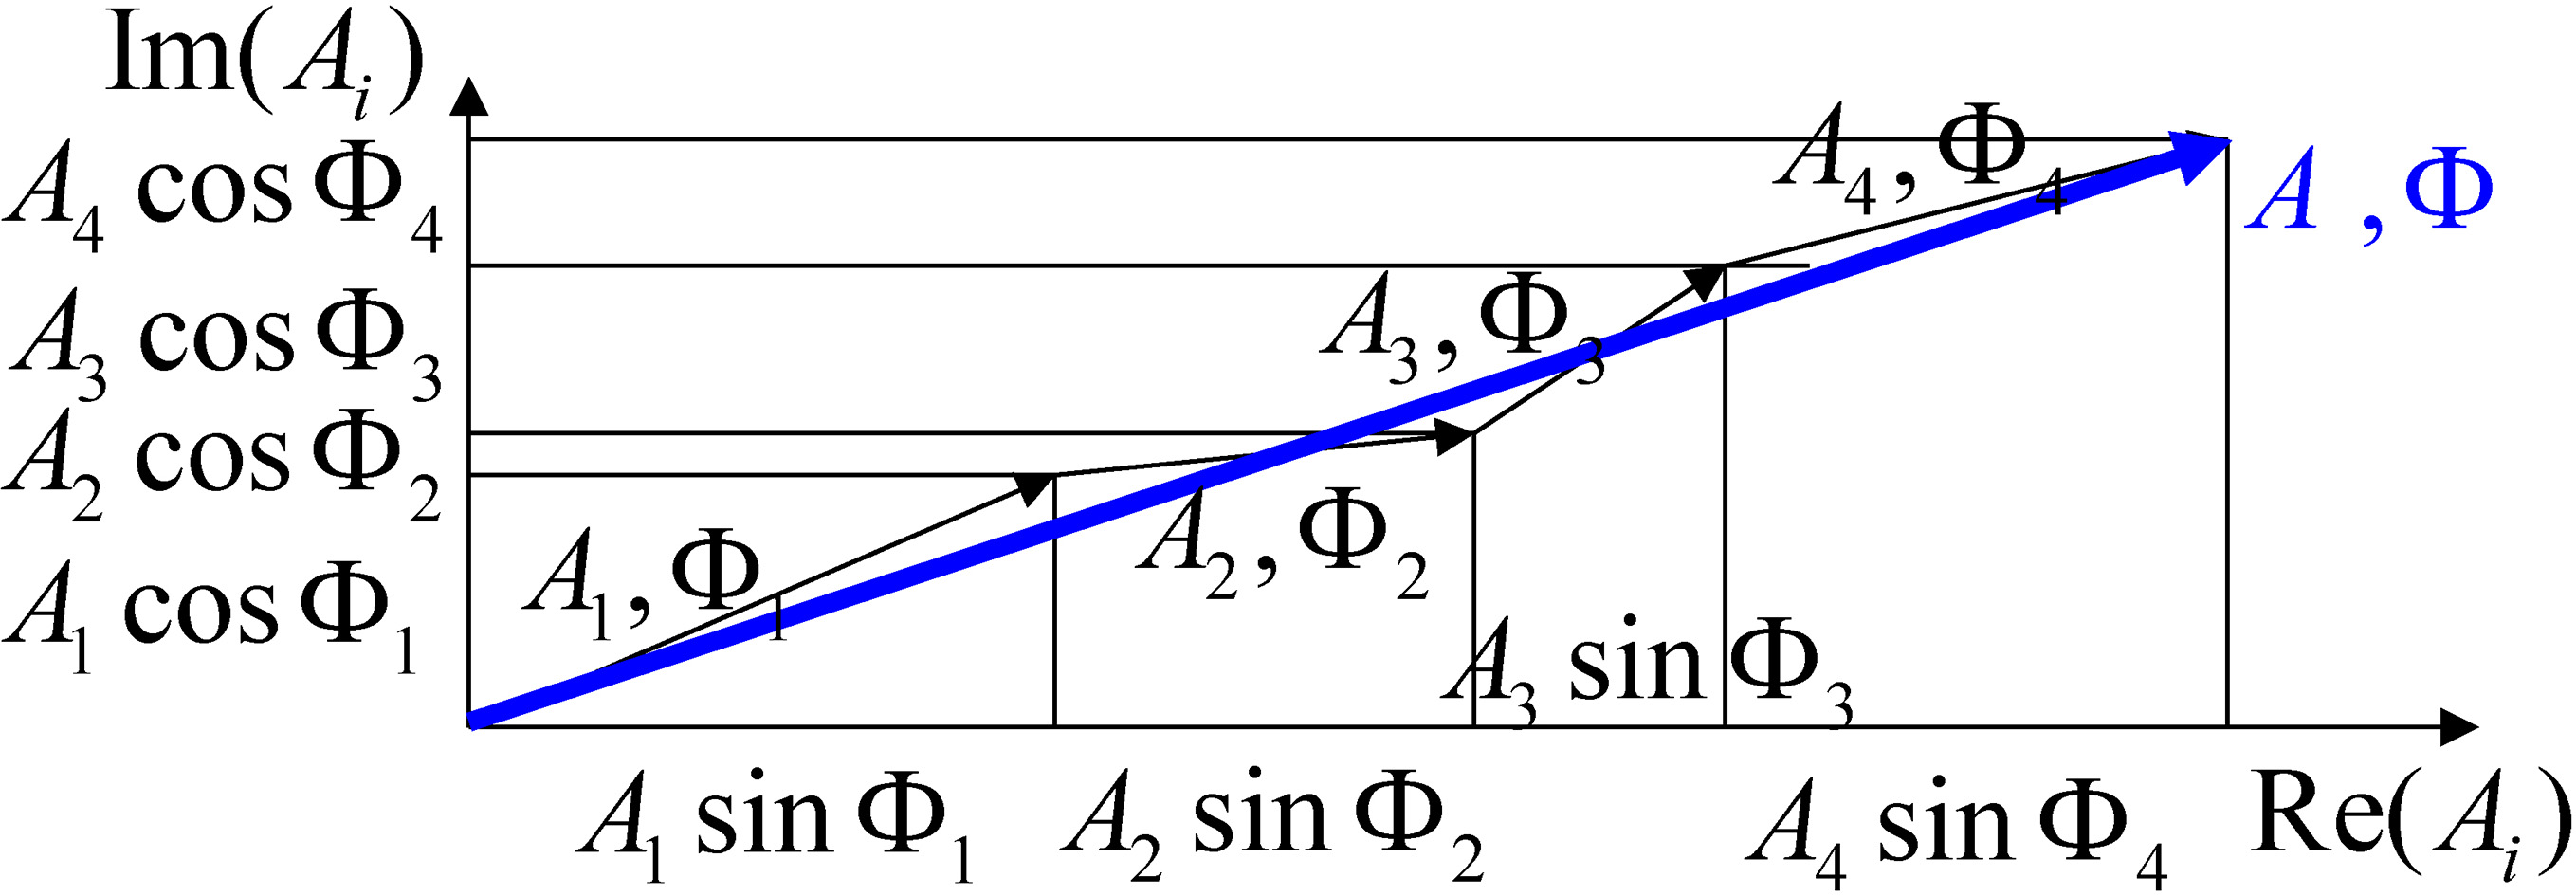 Scheme of the vector summation of the sonic sources.